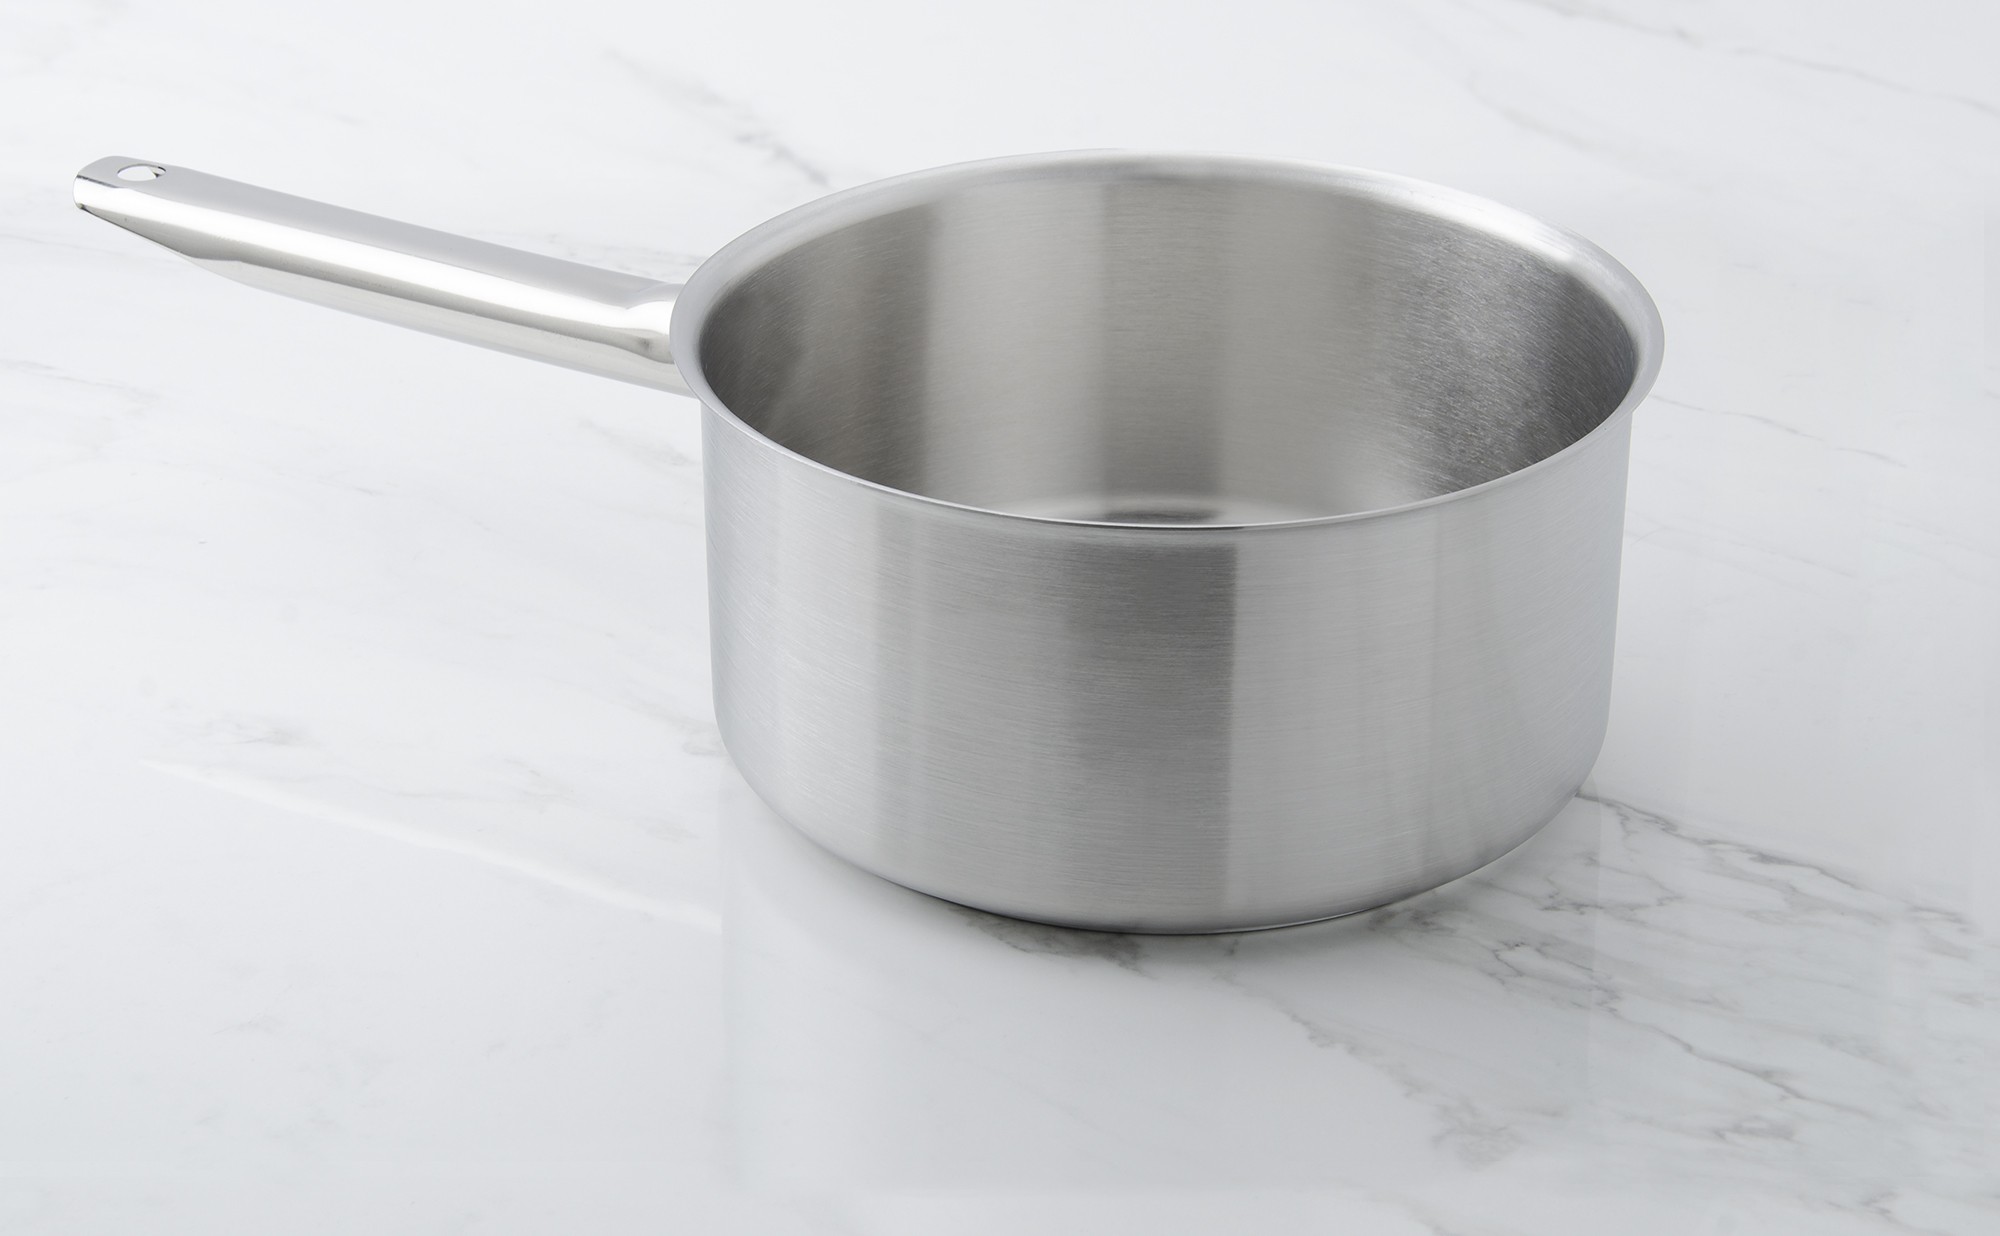 Lid Aluminum Mafter Bourgeat France NSF Bourgeat BP19 Couvercle Inox 28 cm  6920 - Helia Beer Co